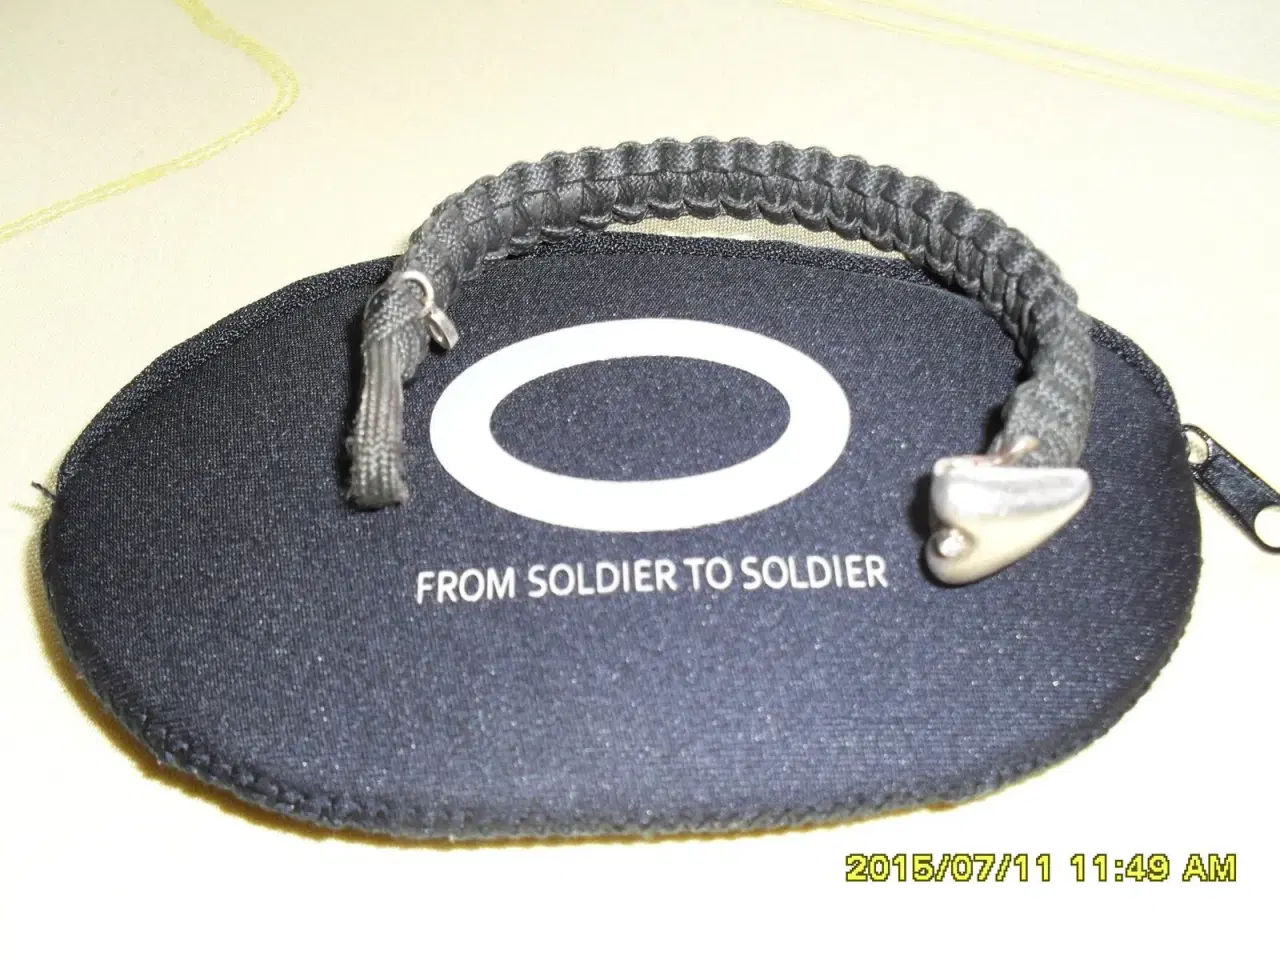 Billede 1 - Armbånd from soldier to soldier